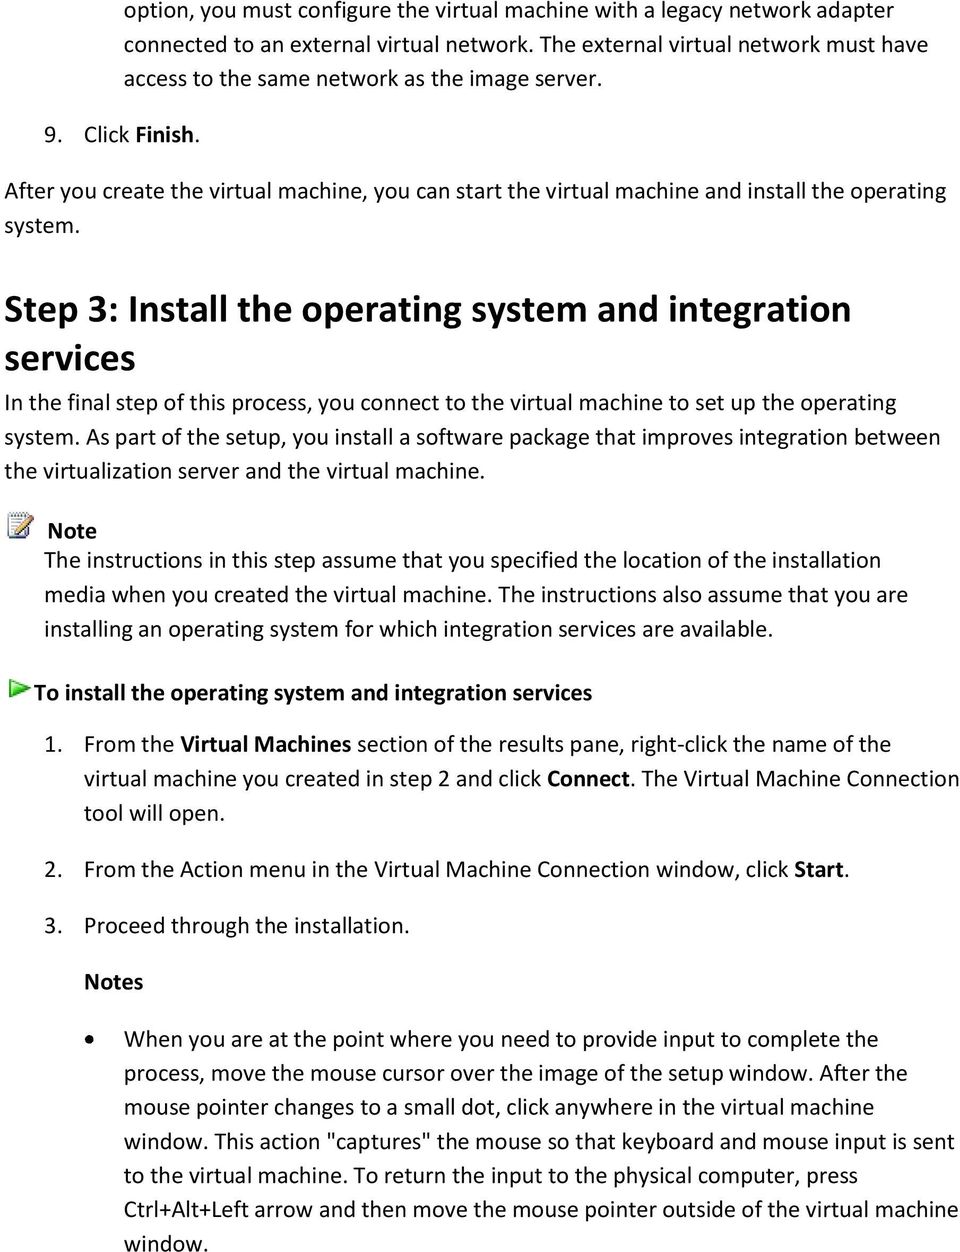 After you create the virtual machine, you can start the virtual machine and install the operating system.